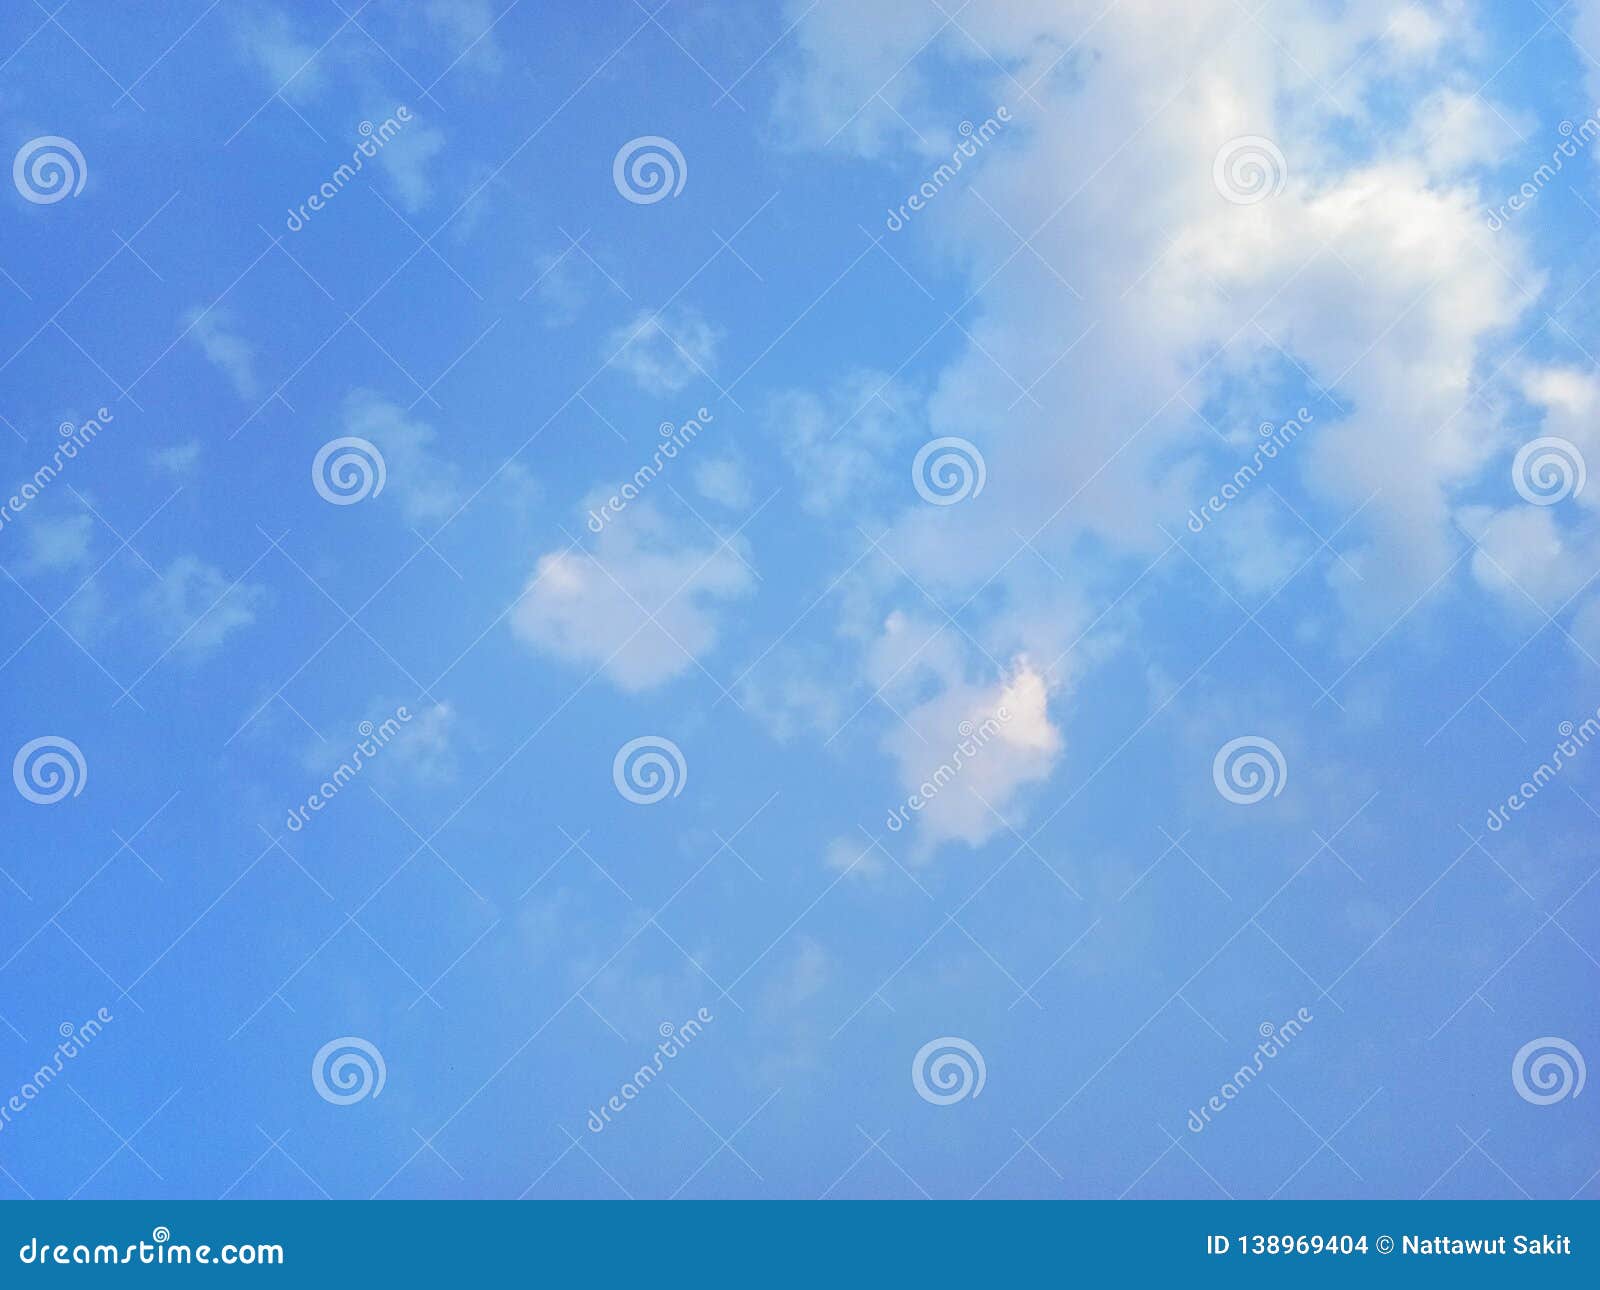 Bright Blue Sky with White Clouds for Graphic Design Stock Photo ...